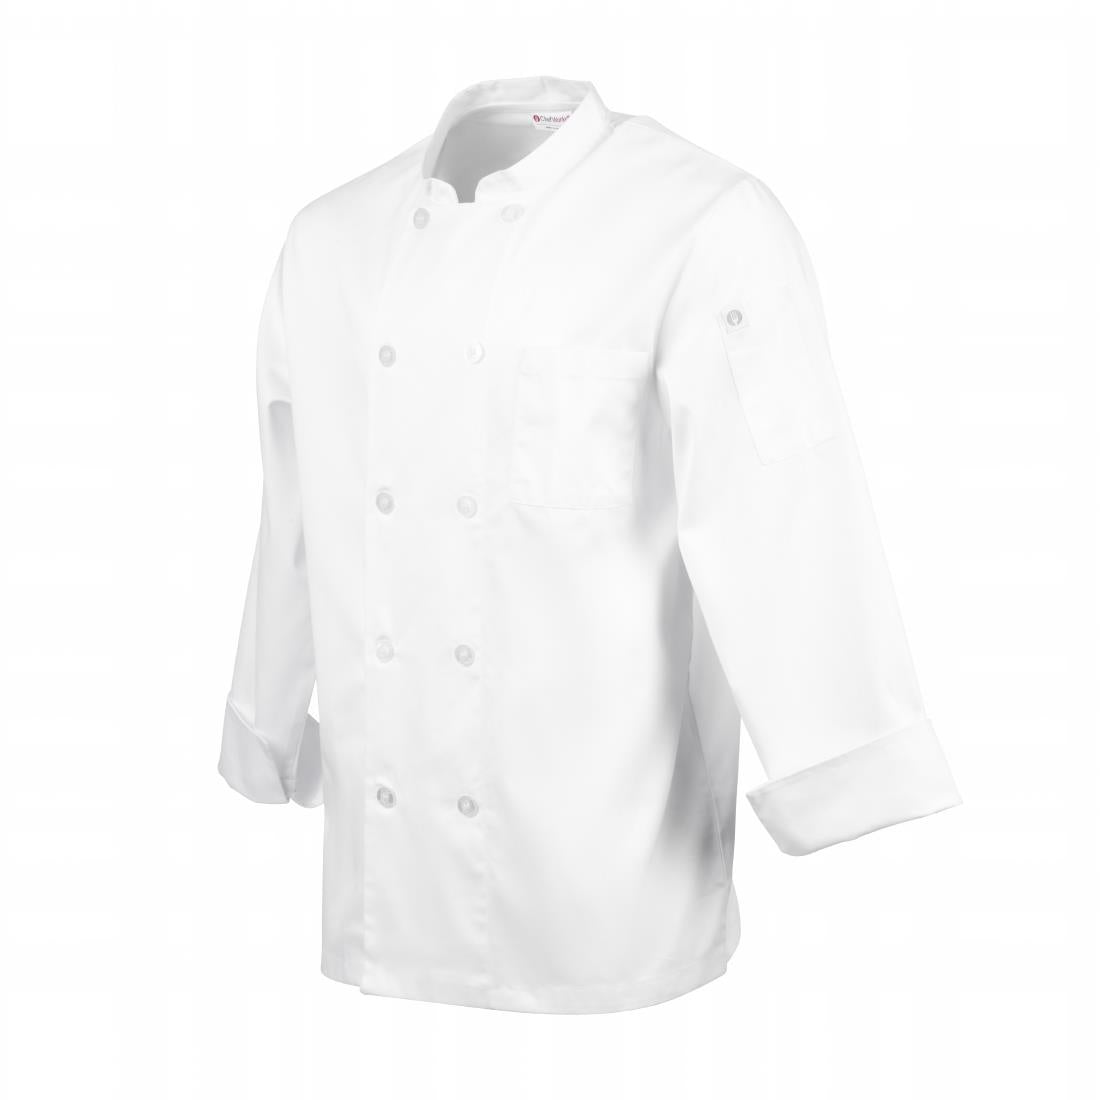 A371-5XL Chef Works Le Mans Chefs Jacket White 5XL JD Catering Equipment Solutions Ltd